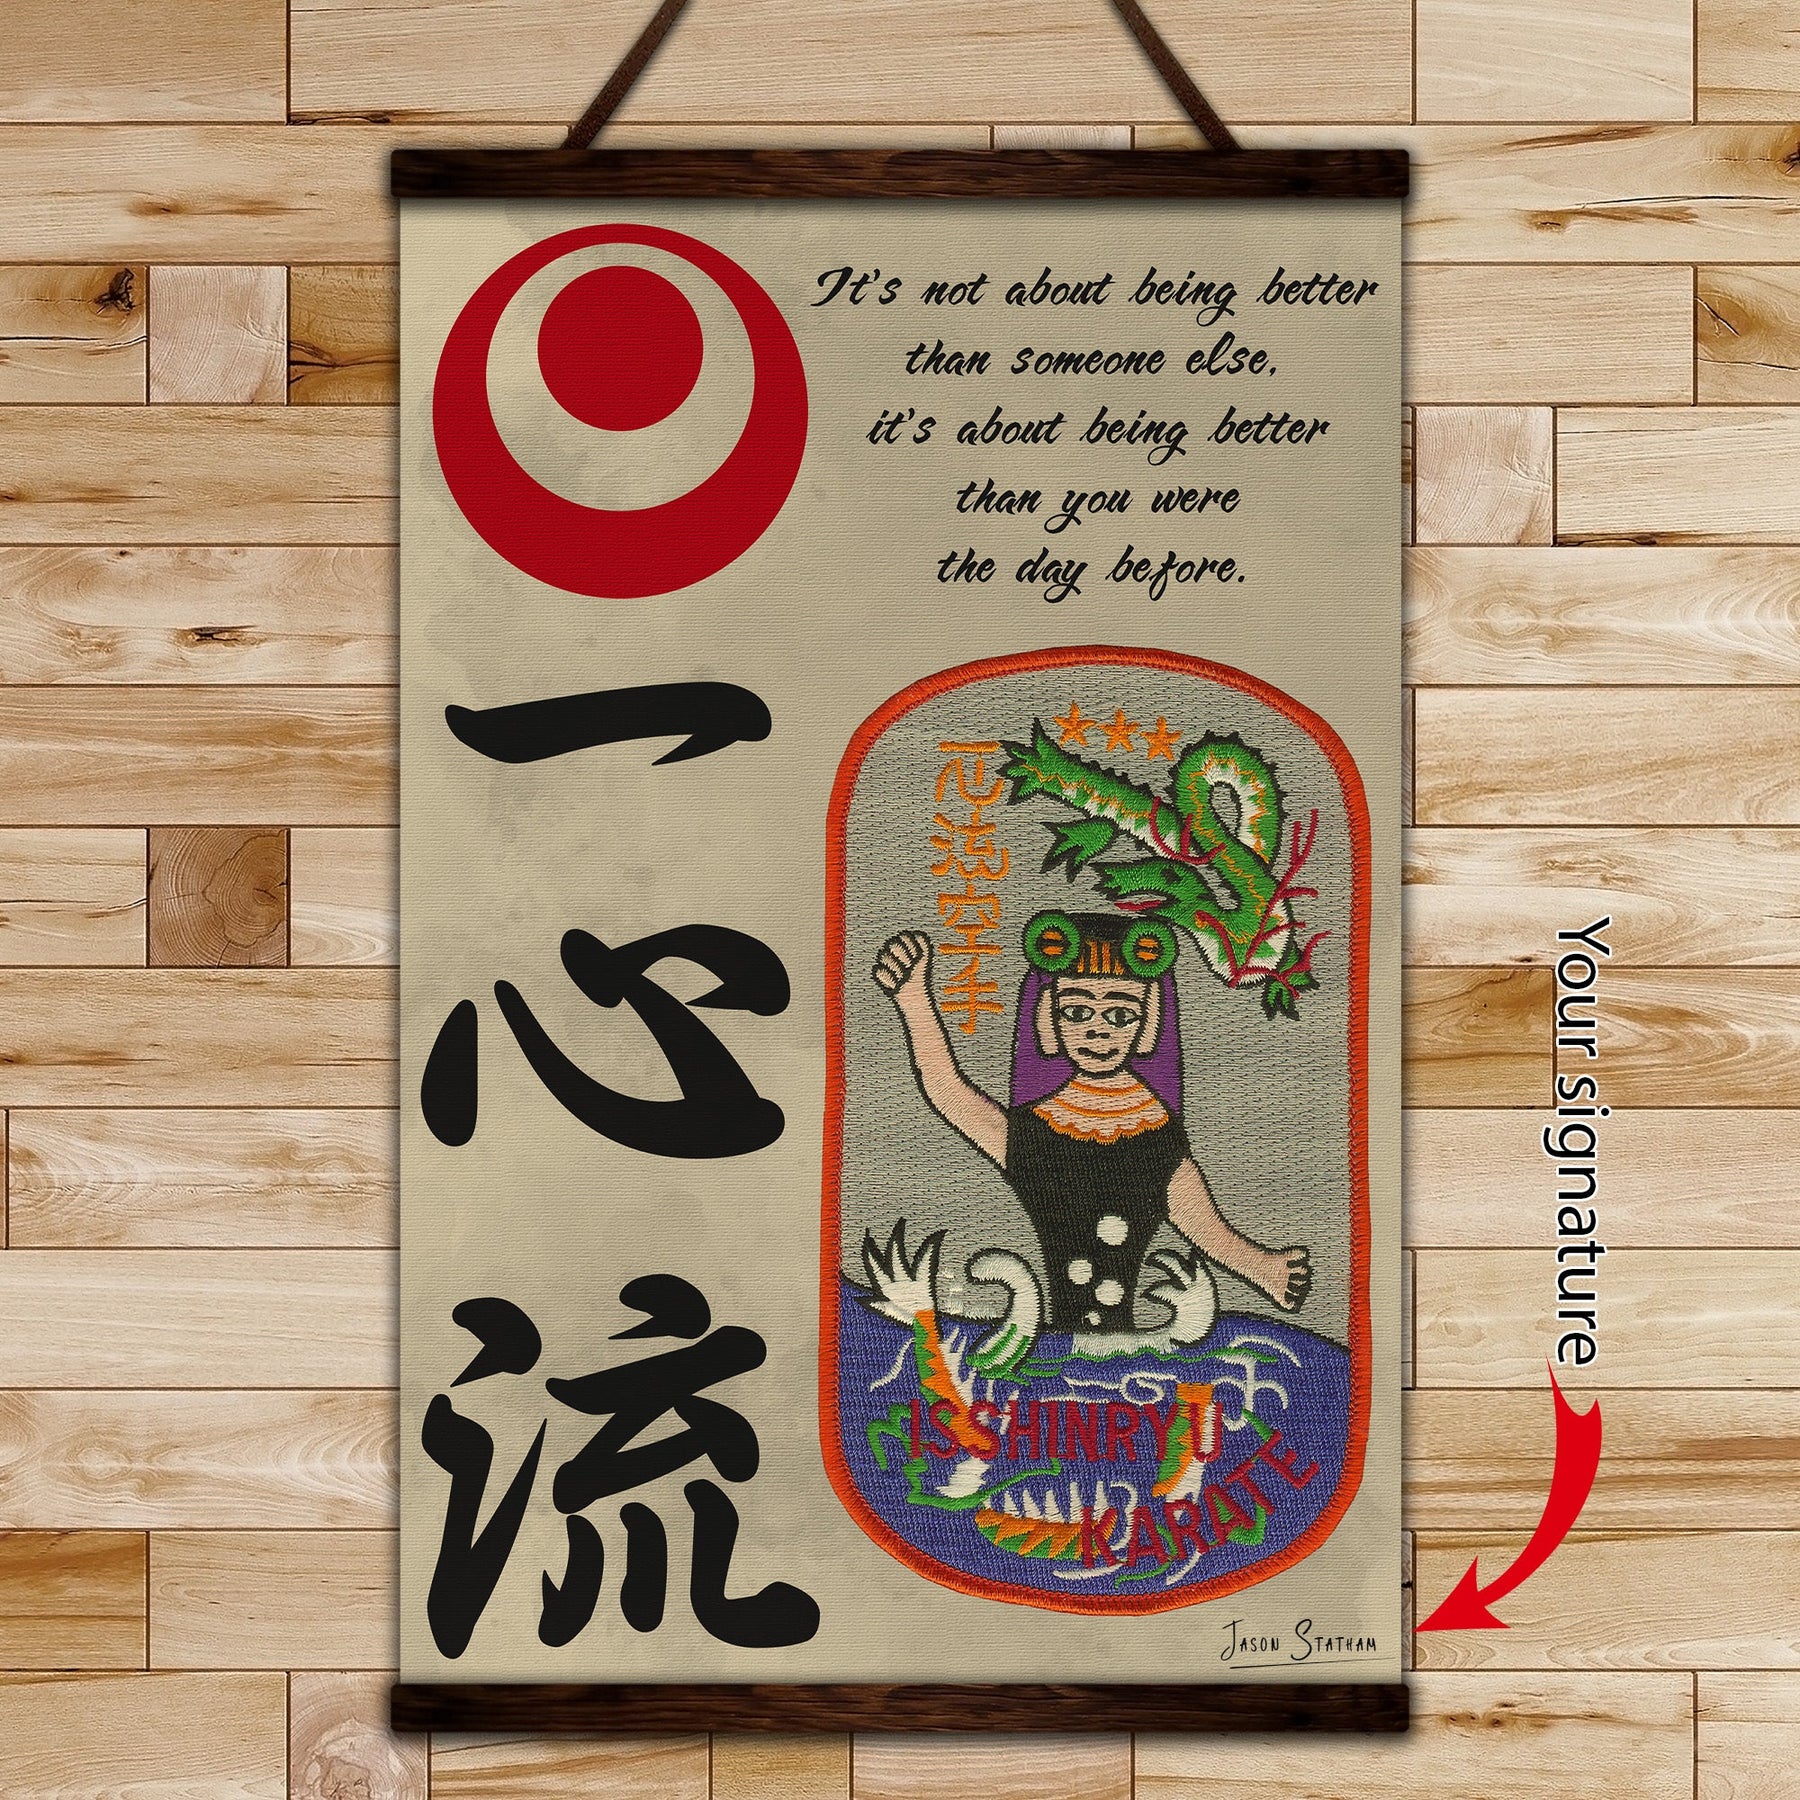 KA007 - It's About Being Better Than You Were The Day Before - Isshinryu Karate  - Vertical Poster - Vertical Canvas - Karate Poster